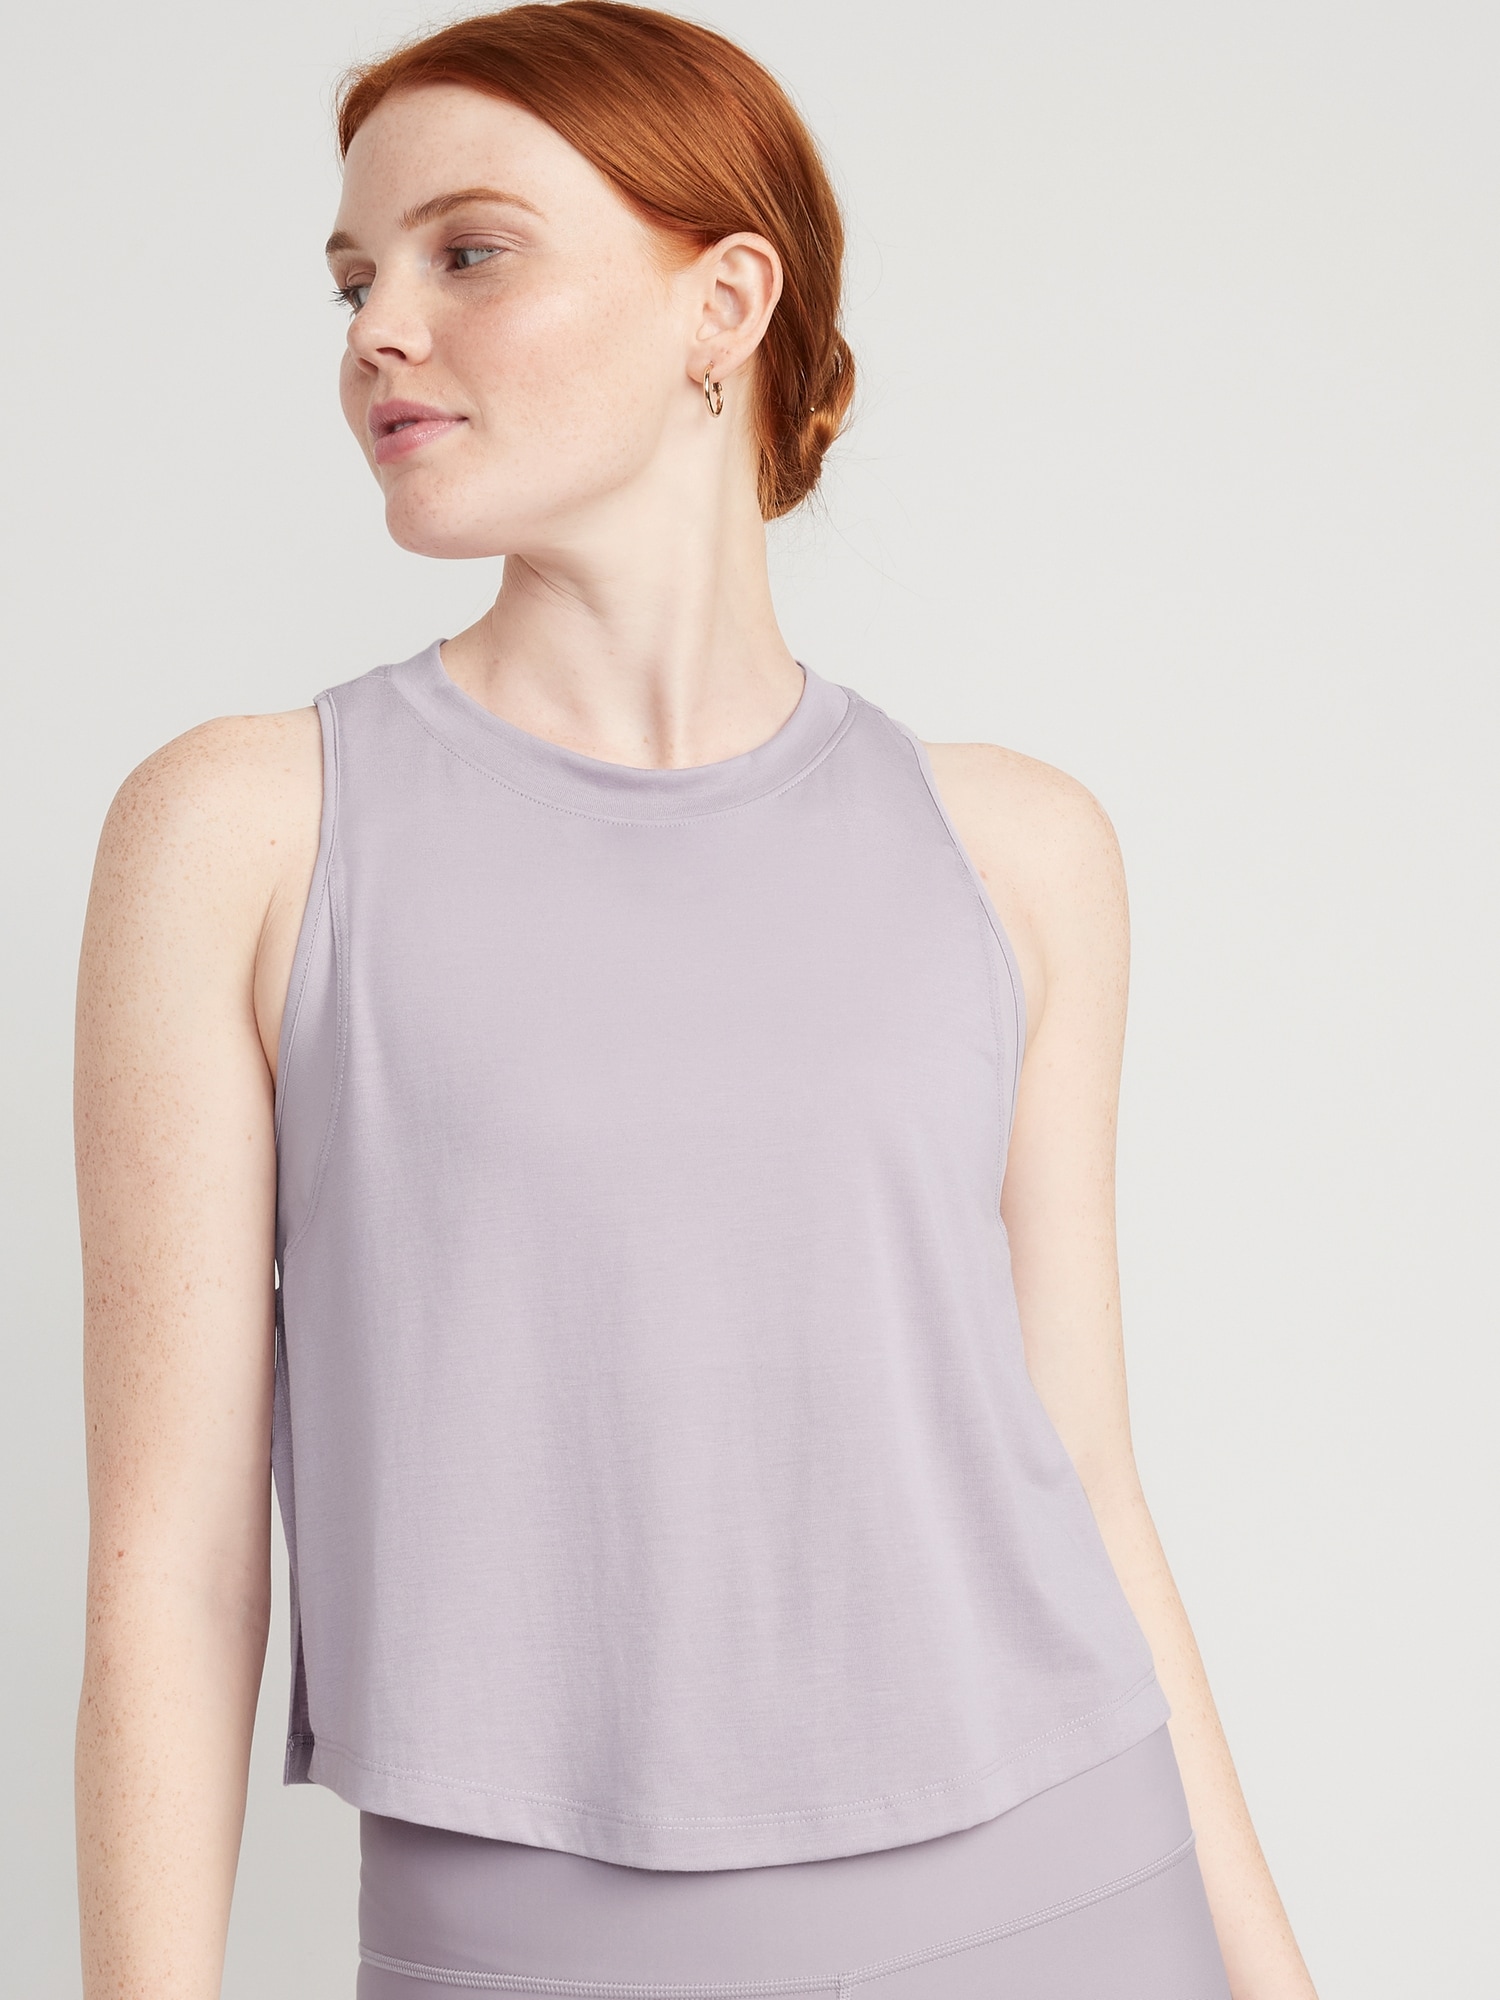 Old Navy UltraLite All-Day Sleeveless Cropped Top for Women purple. 1